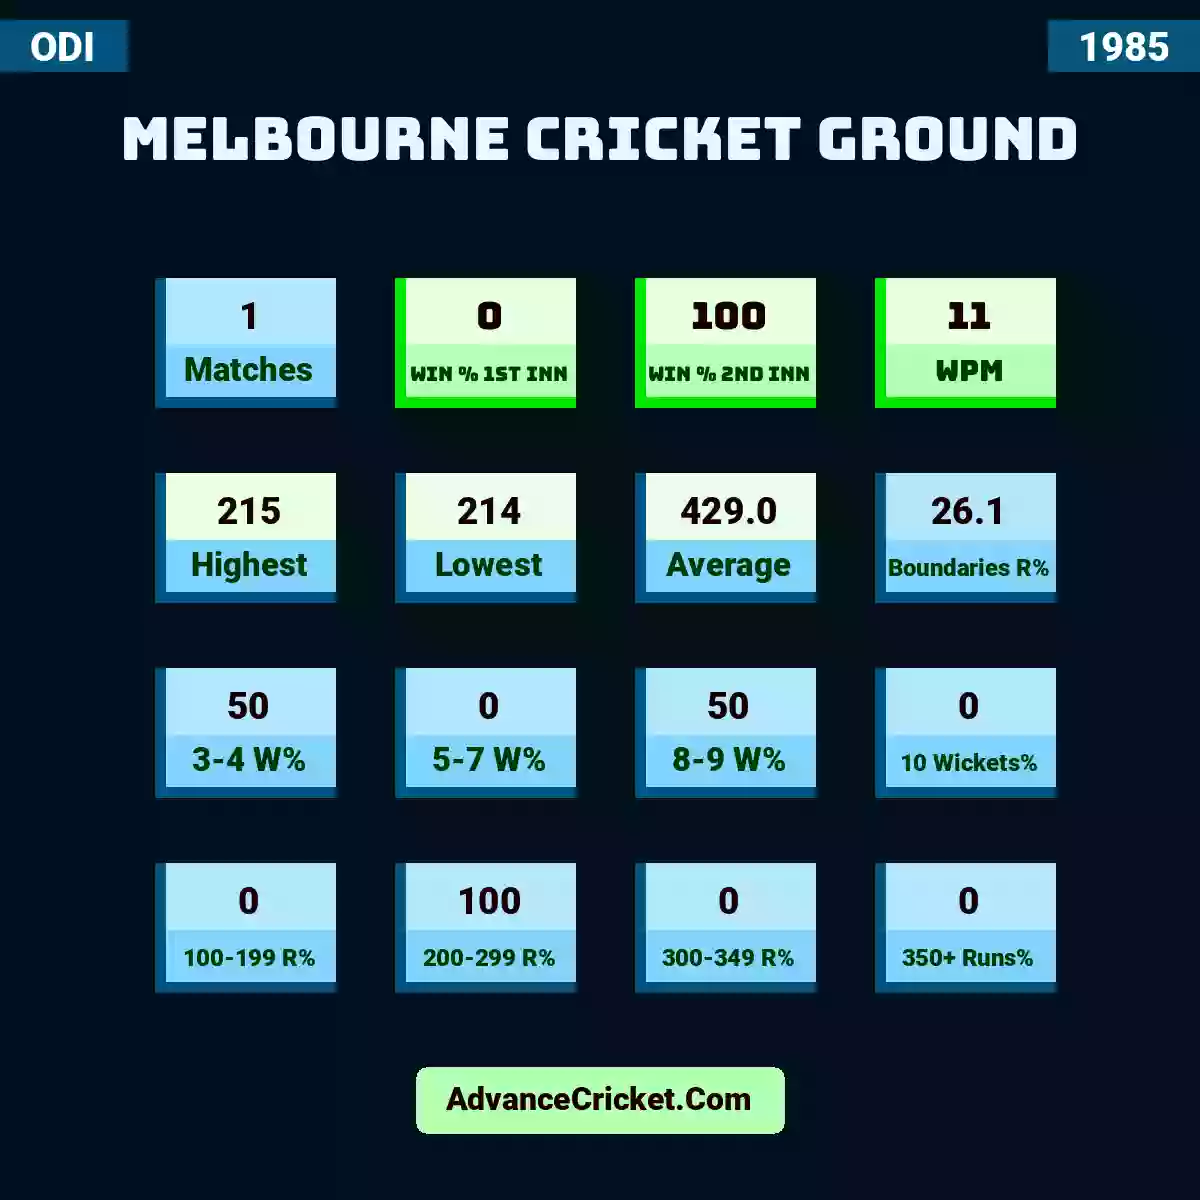 Image showing Melbourne Cricket Ground with Matches: 1, Win % 1st Inn: 0, Win % 2nd Inn: 100, WPM: 11, Highest: 215, Lowest: 214, Average: 429.0, Boundaries R%: 26.1, 3-4 W%: 50, 5-7 W%: 0, 8-9 W%: 50, 10 Wickets%: 0, 100-199 R%: 0, 200-299 R%: 100, 300-349 R%: 0, 350+ Runs%: 0.